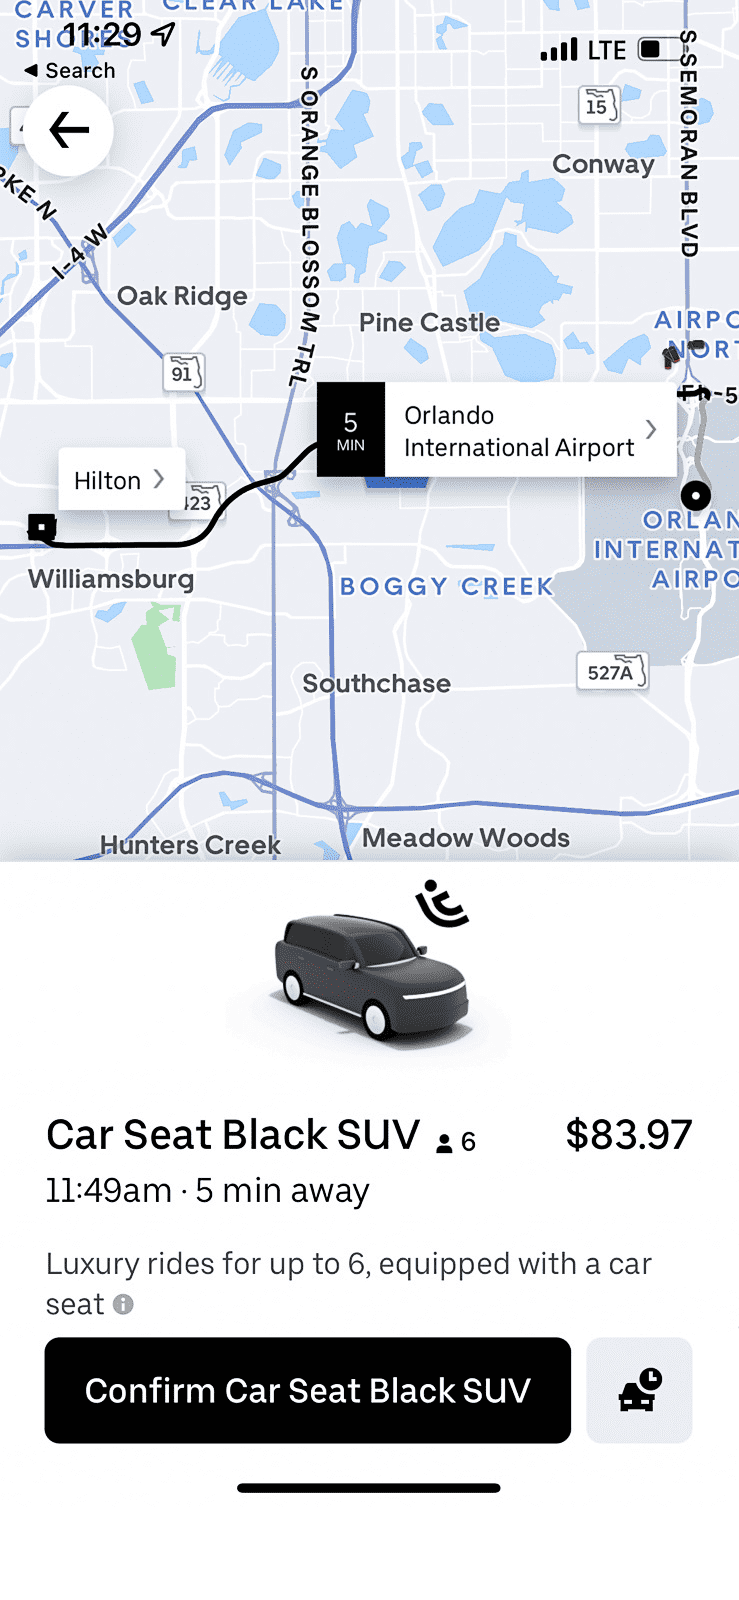 MCO Airport Uber Ride Car Share App F with Uber Price from MCO to Hilton Orlando Hotel